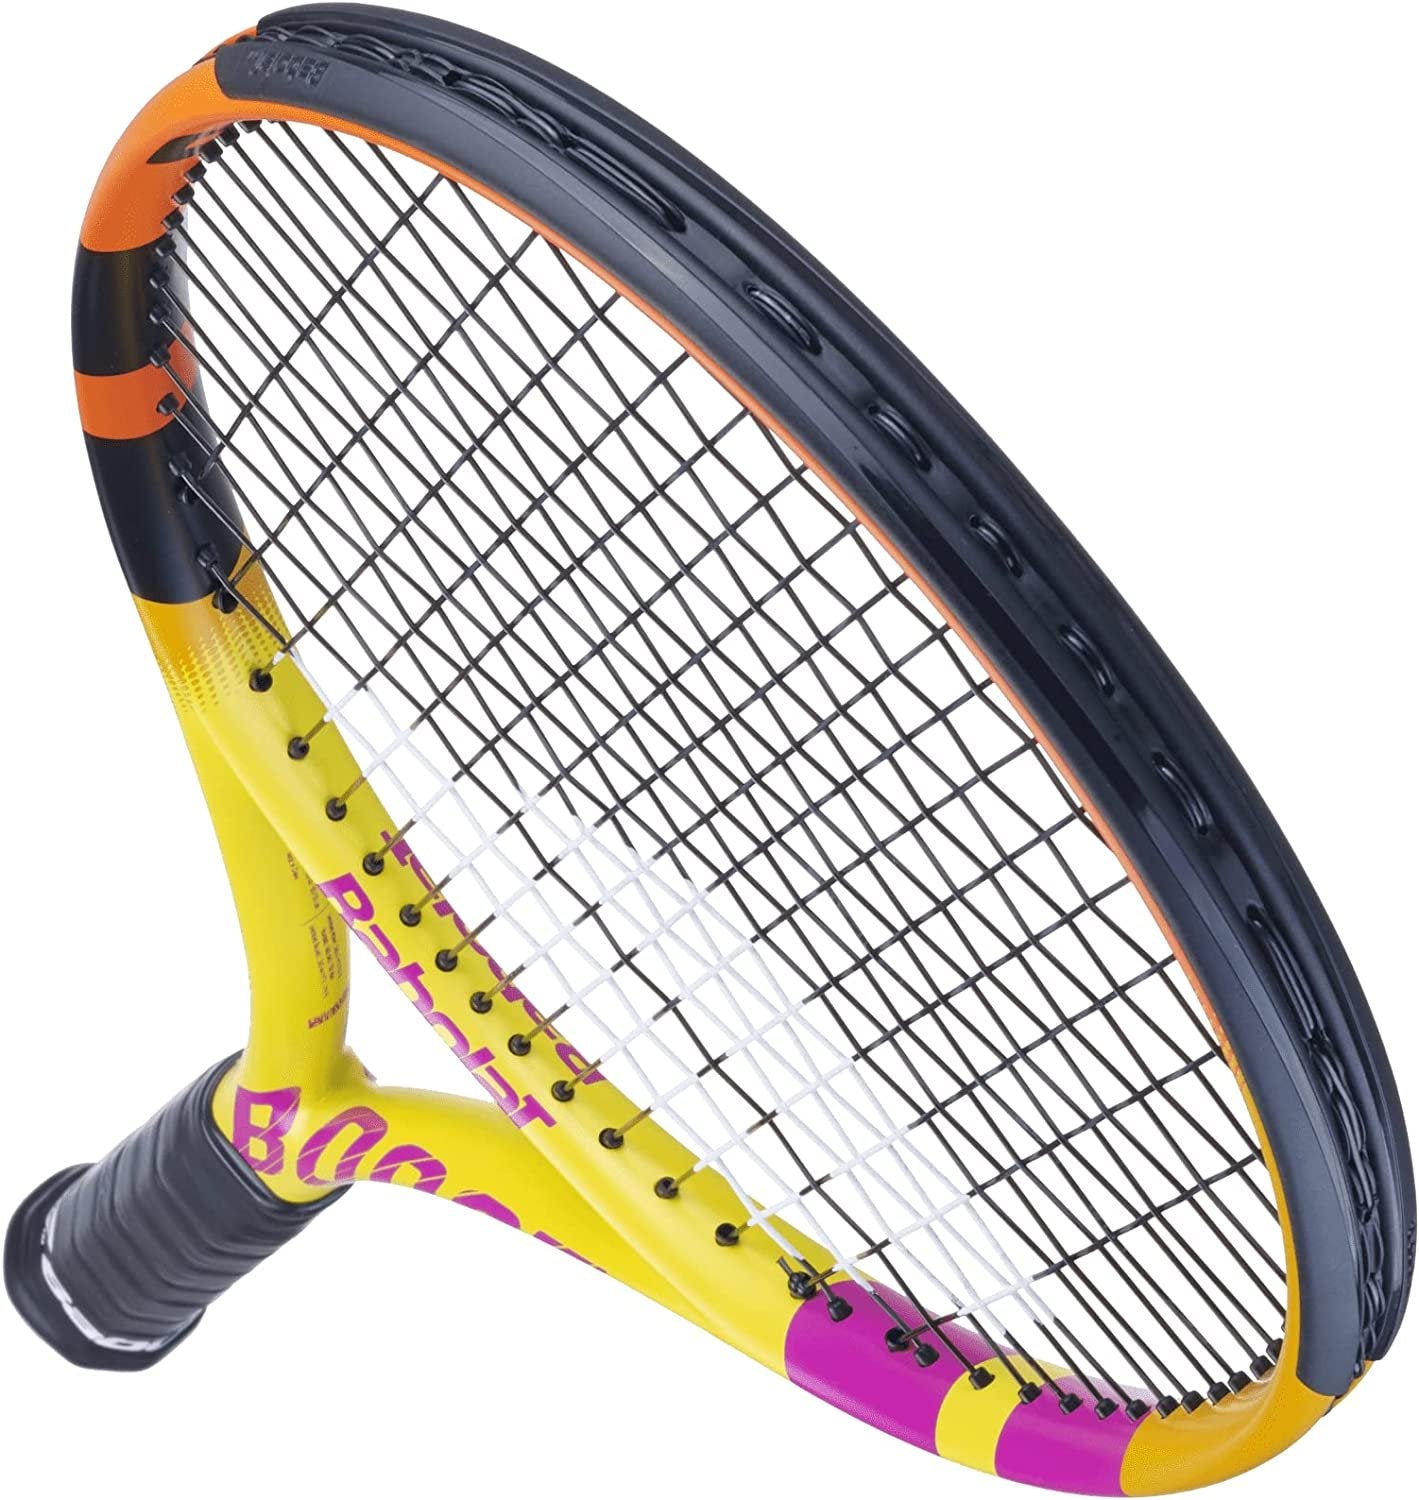 Babolat Boost Aero Rafa Strung Tennis Racquet Bundled with an RH3 Club Essential Tennis Bag in Your Choice of Color